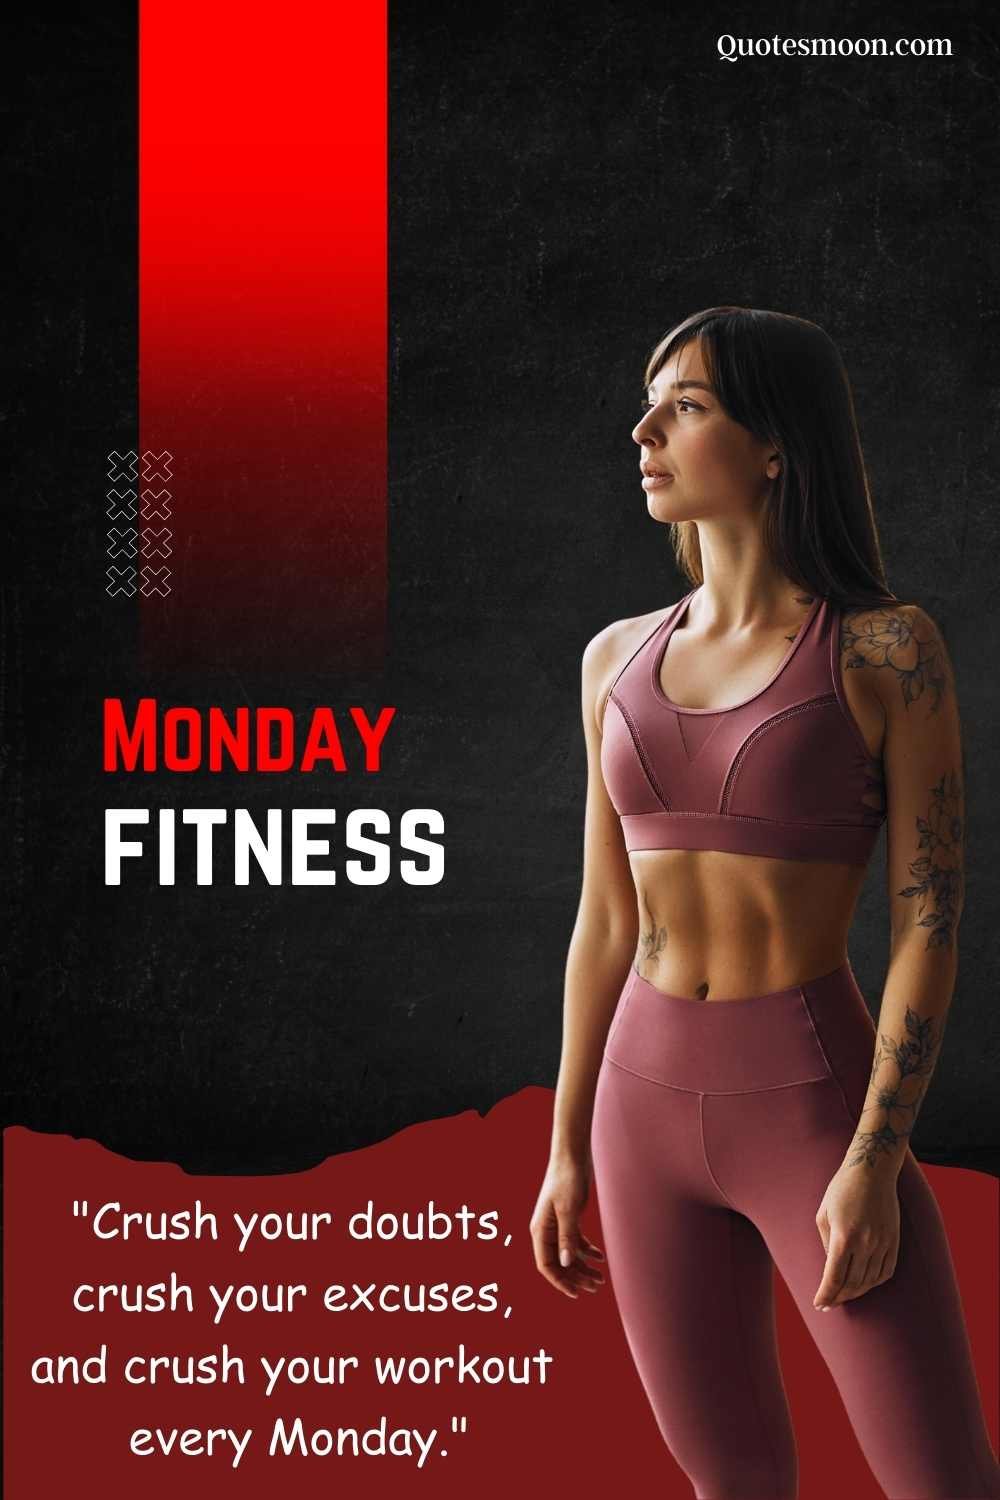 monday inspiration workout quotes images